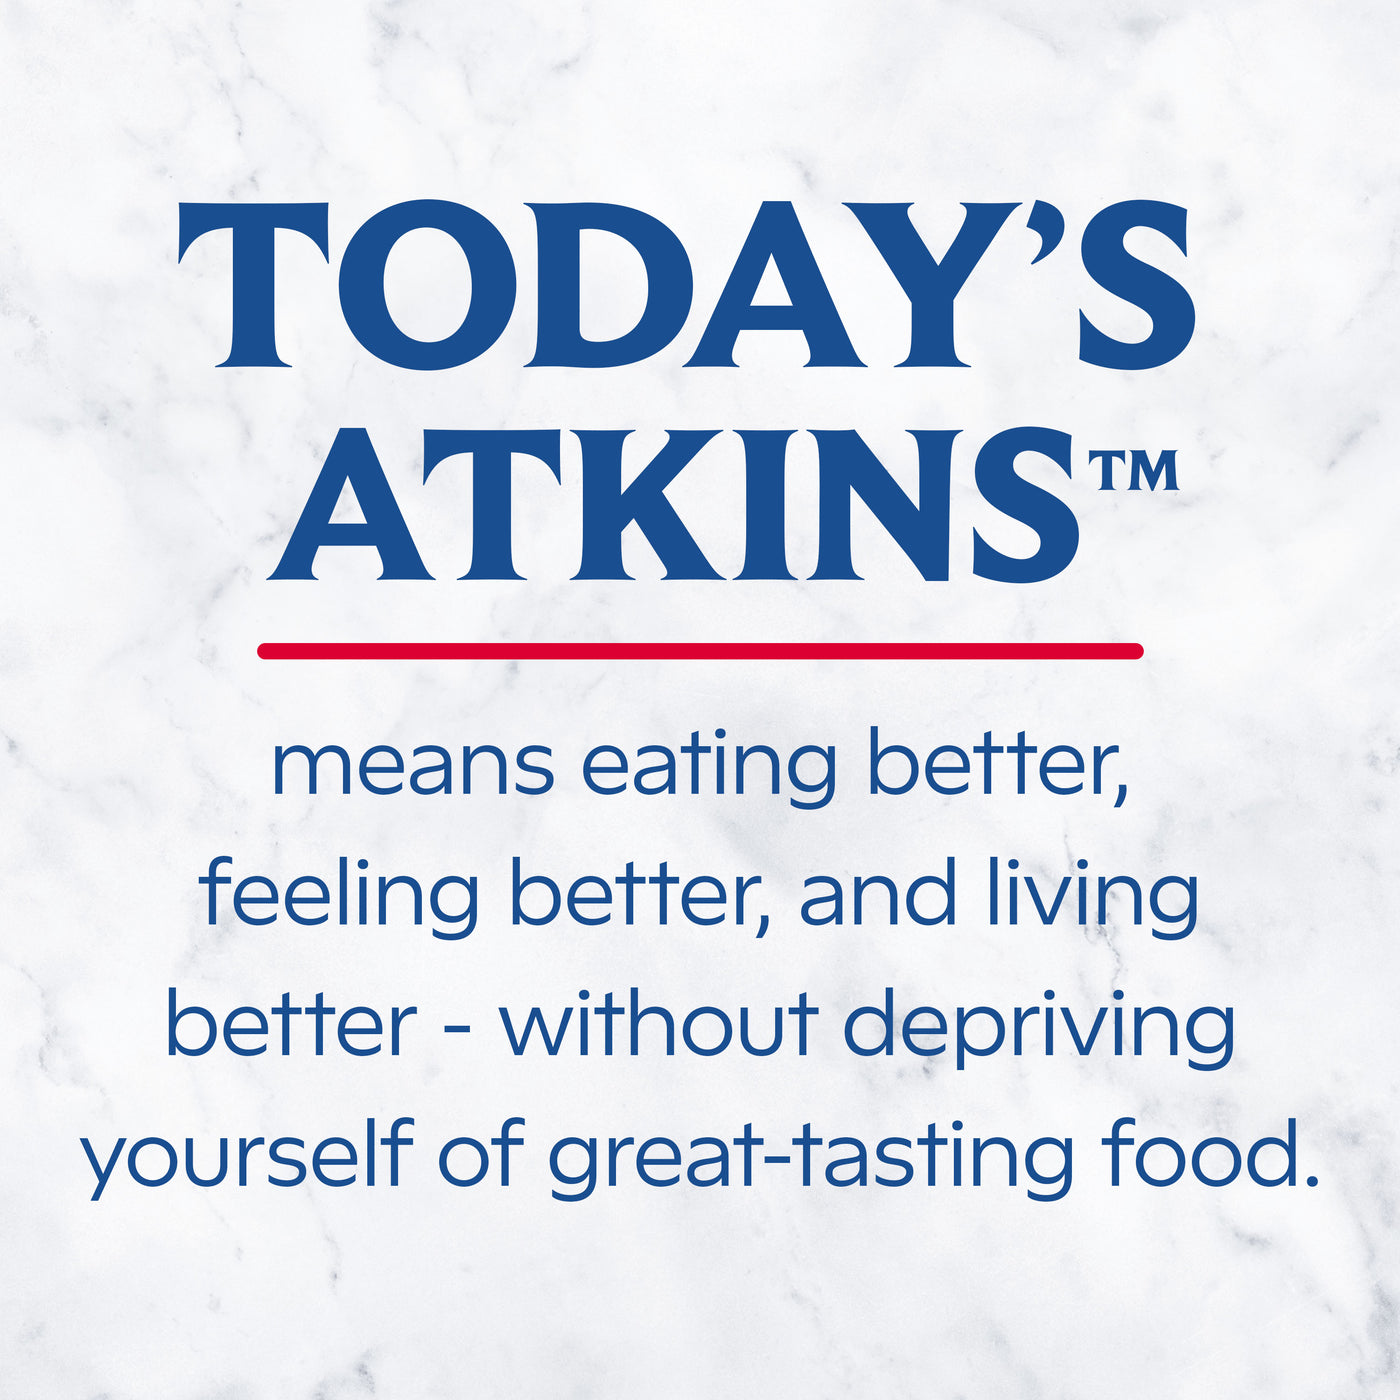 Today's Atkins means eating better, feeling better, and living better-without depriving yourself of great-tasting food.